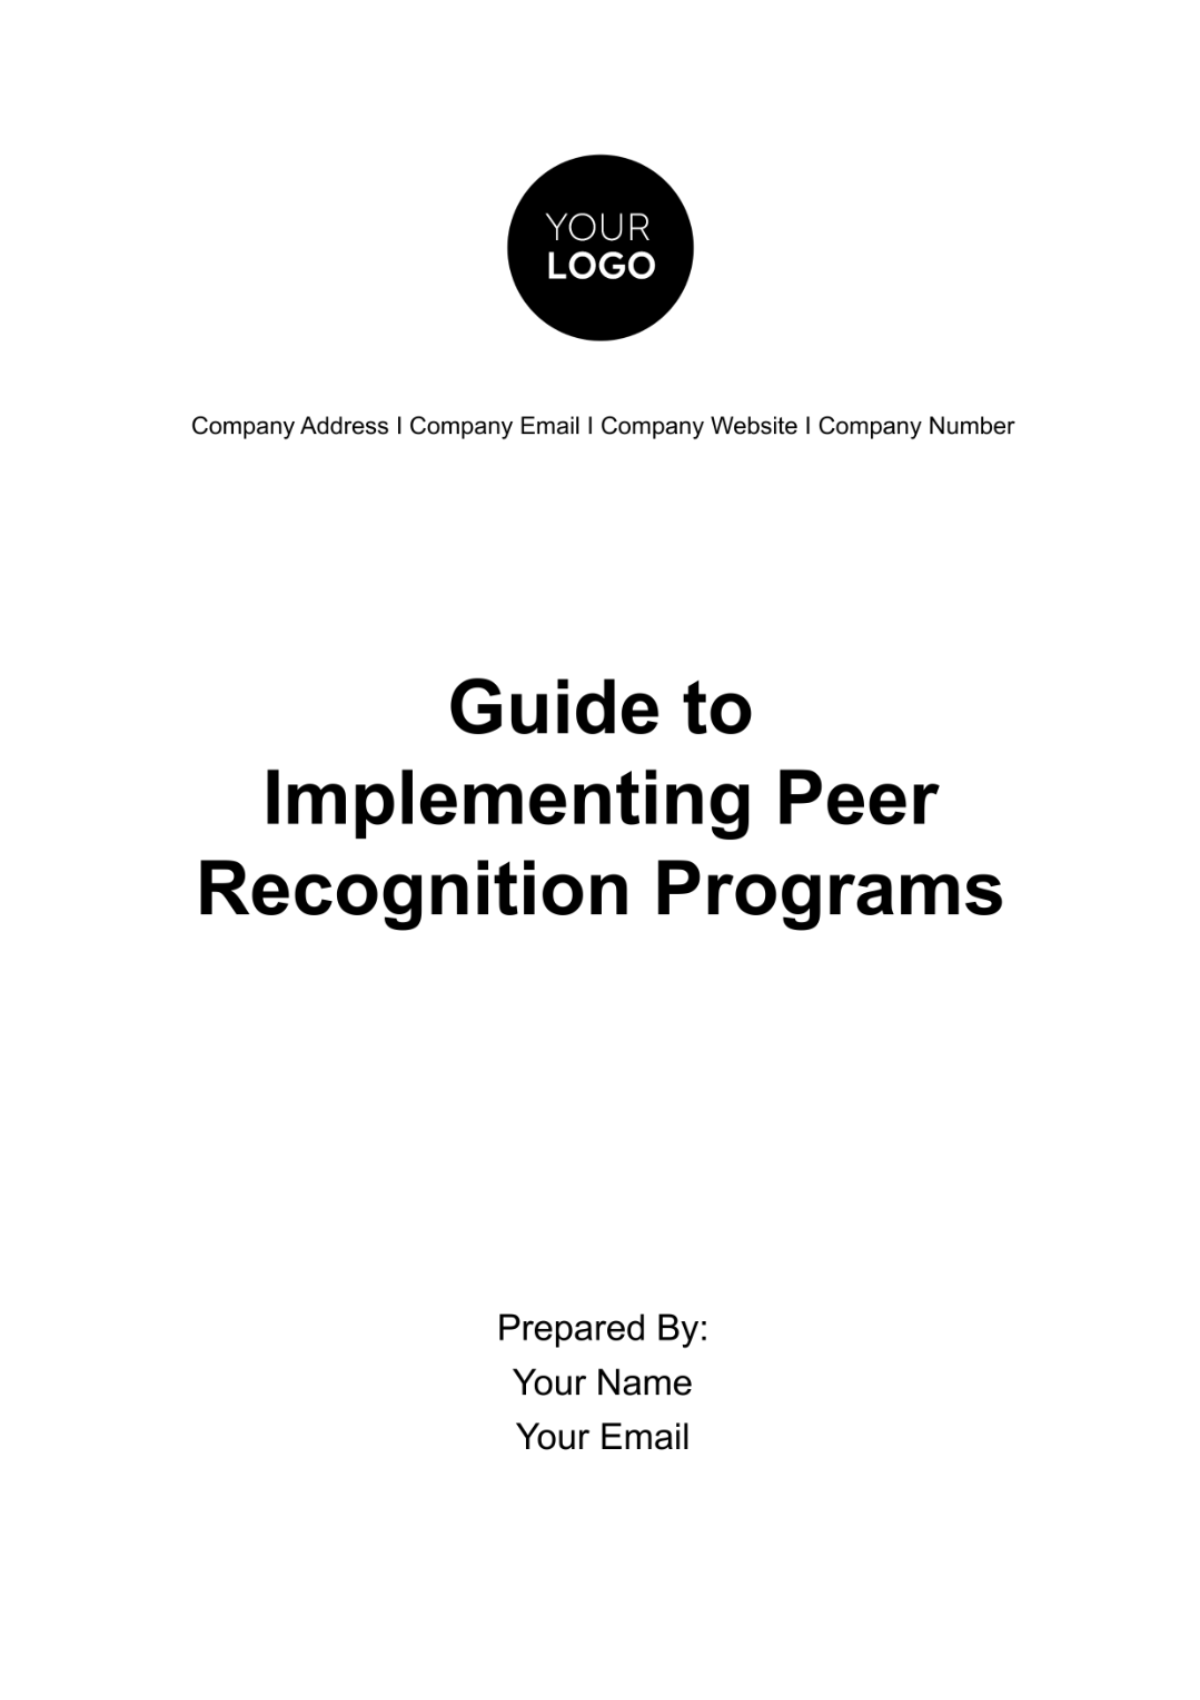 Free Guide to Implementing Peer Recognition Programs HR Template